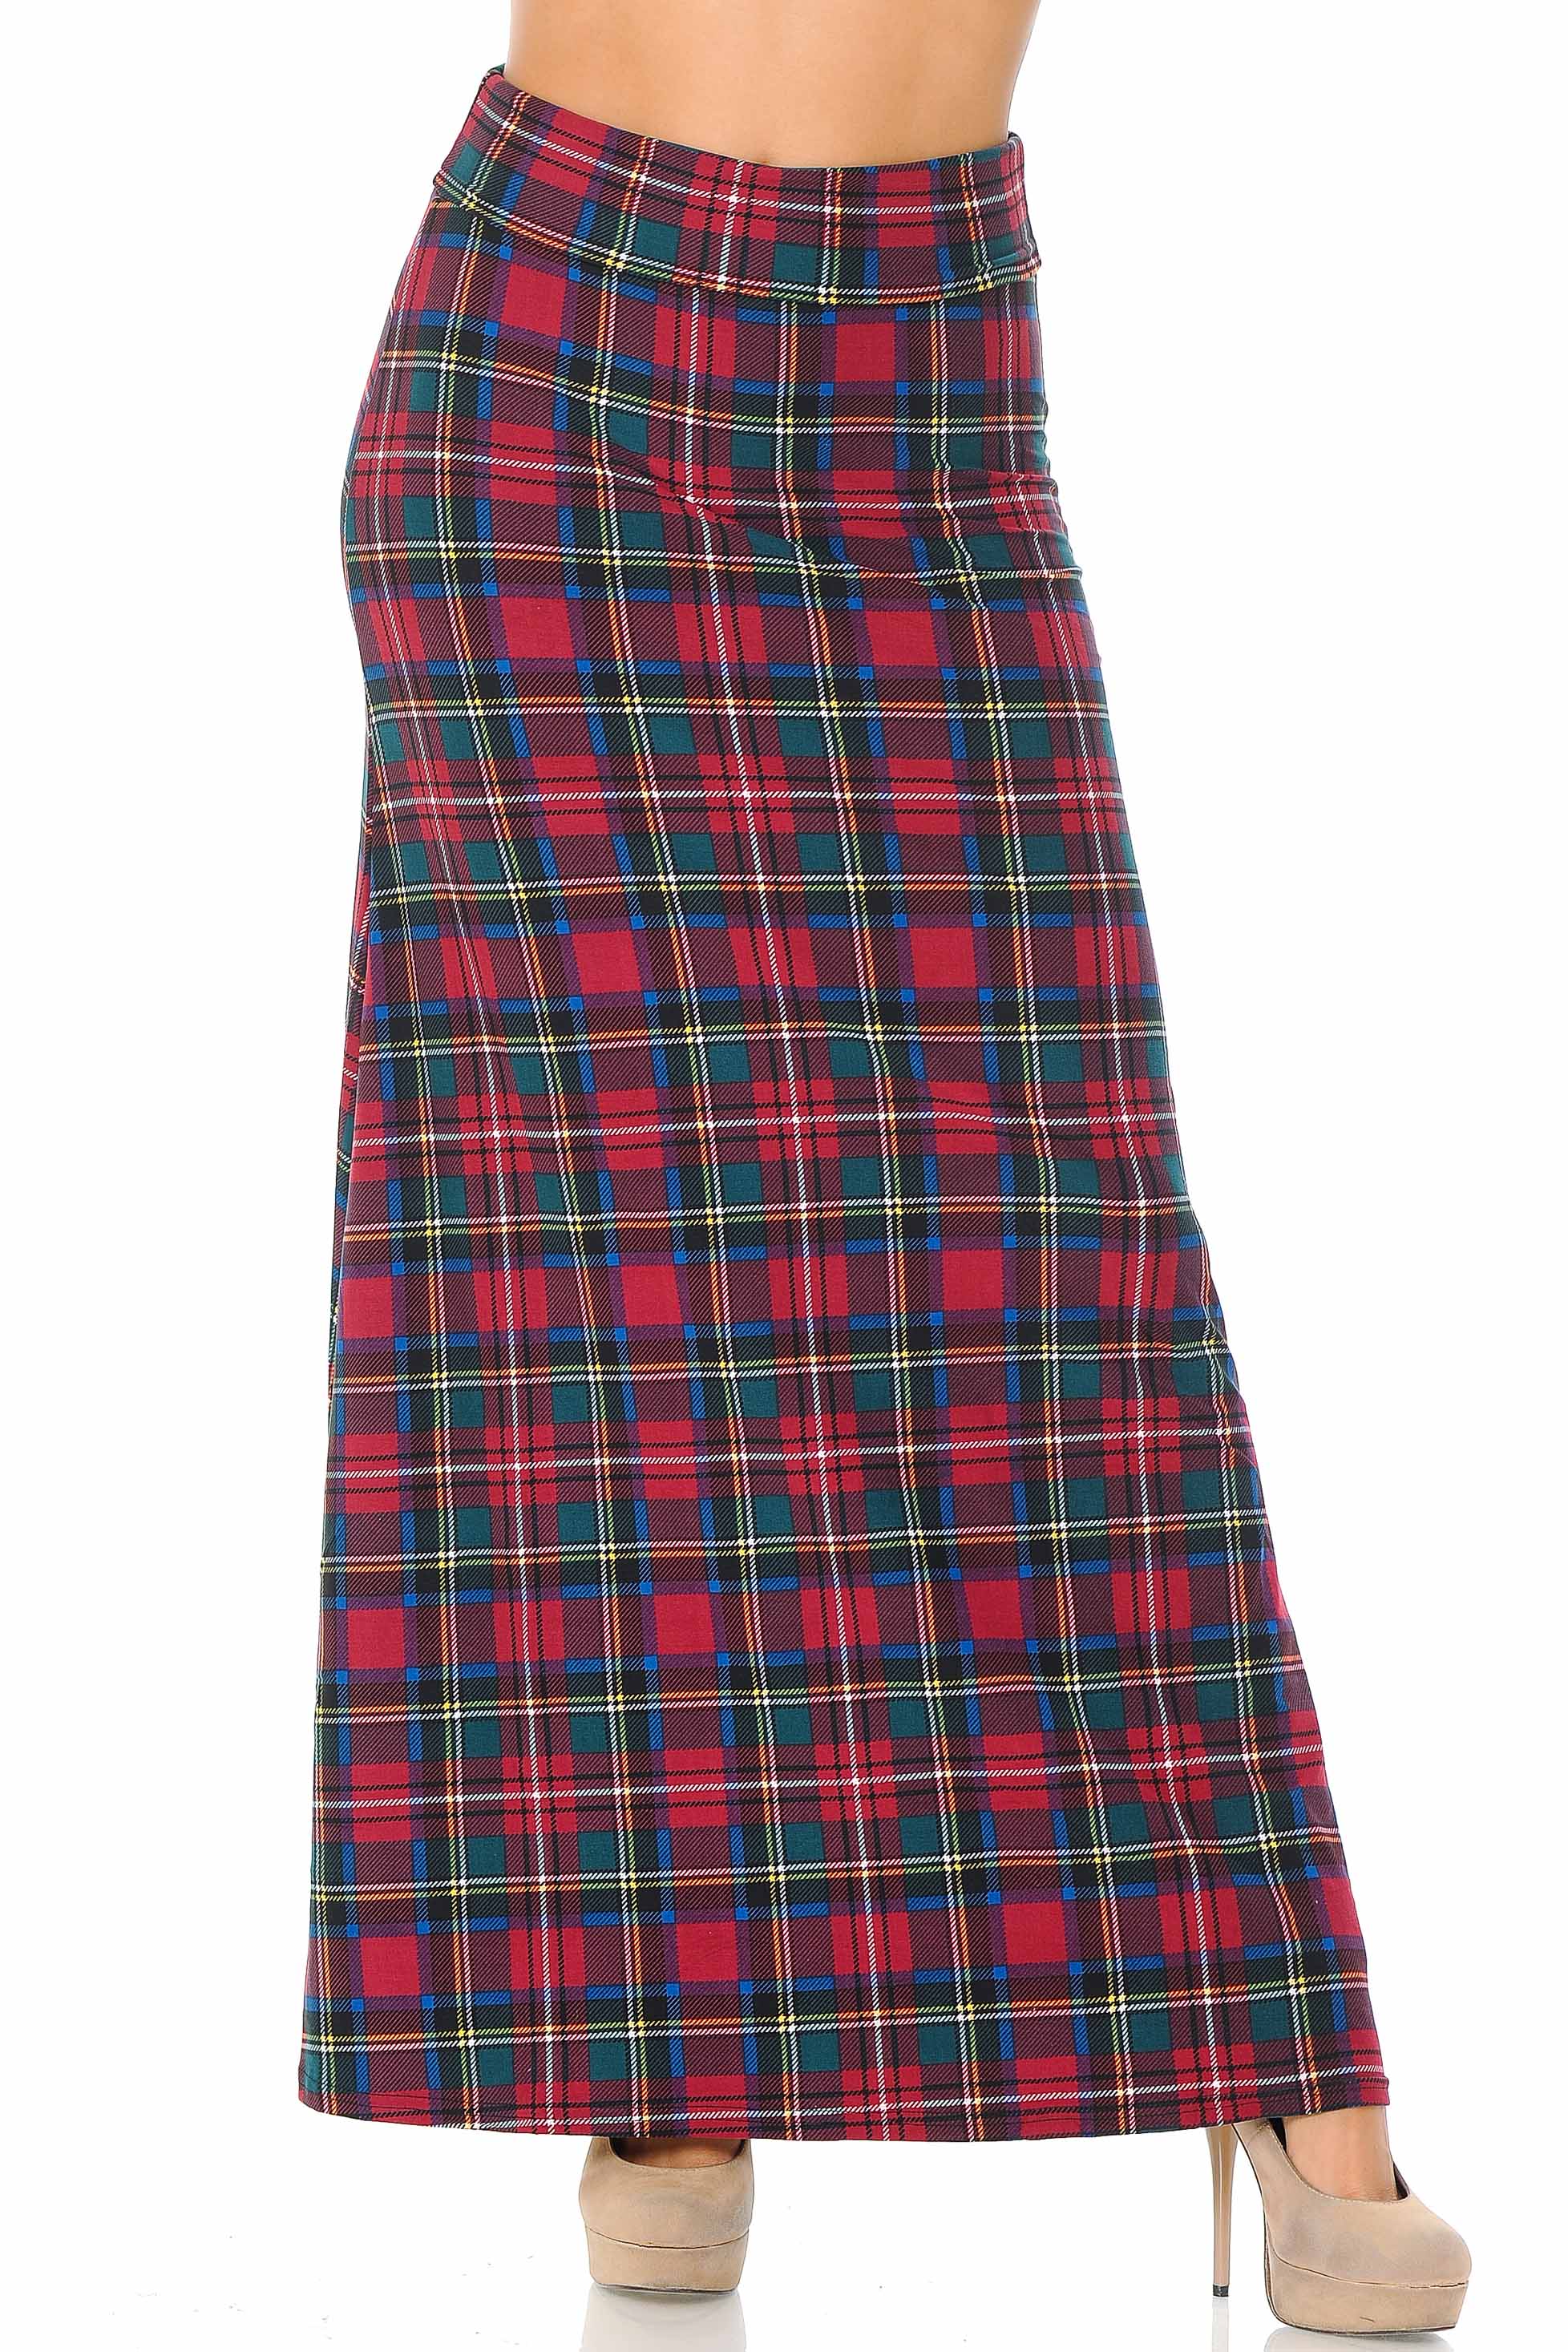 Wholesale Buttery Smooth Modish Plaid Maxi Skirt